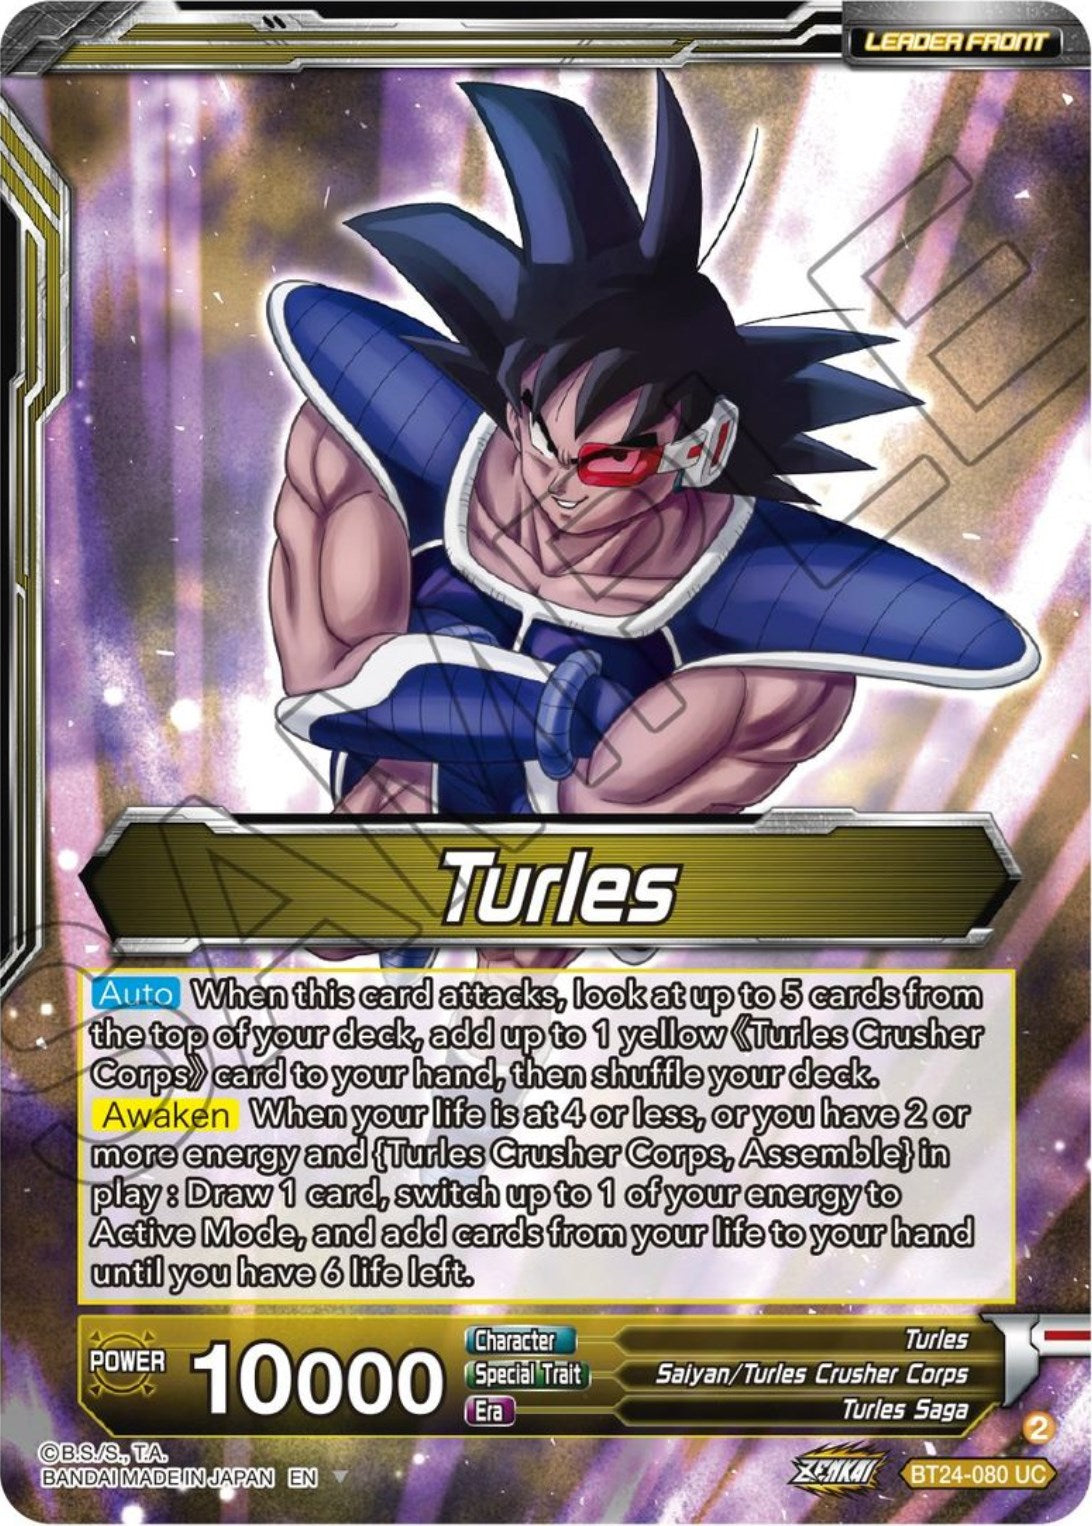 Turles // Turles, Corps Commander (BT24-080) [Beyond Generations] | The Time Vault CA